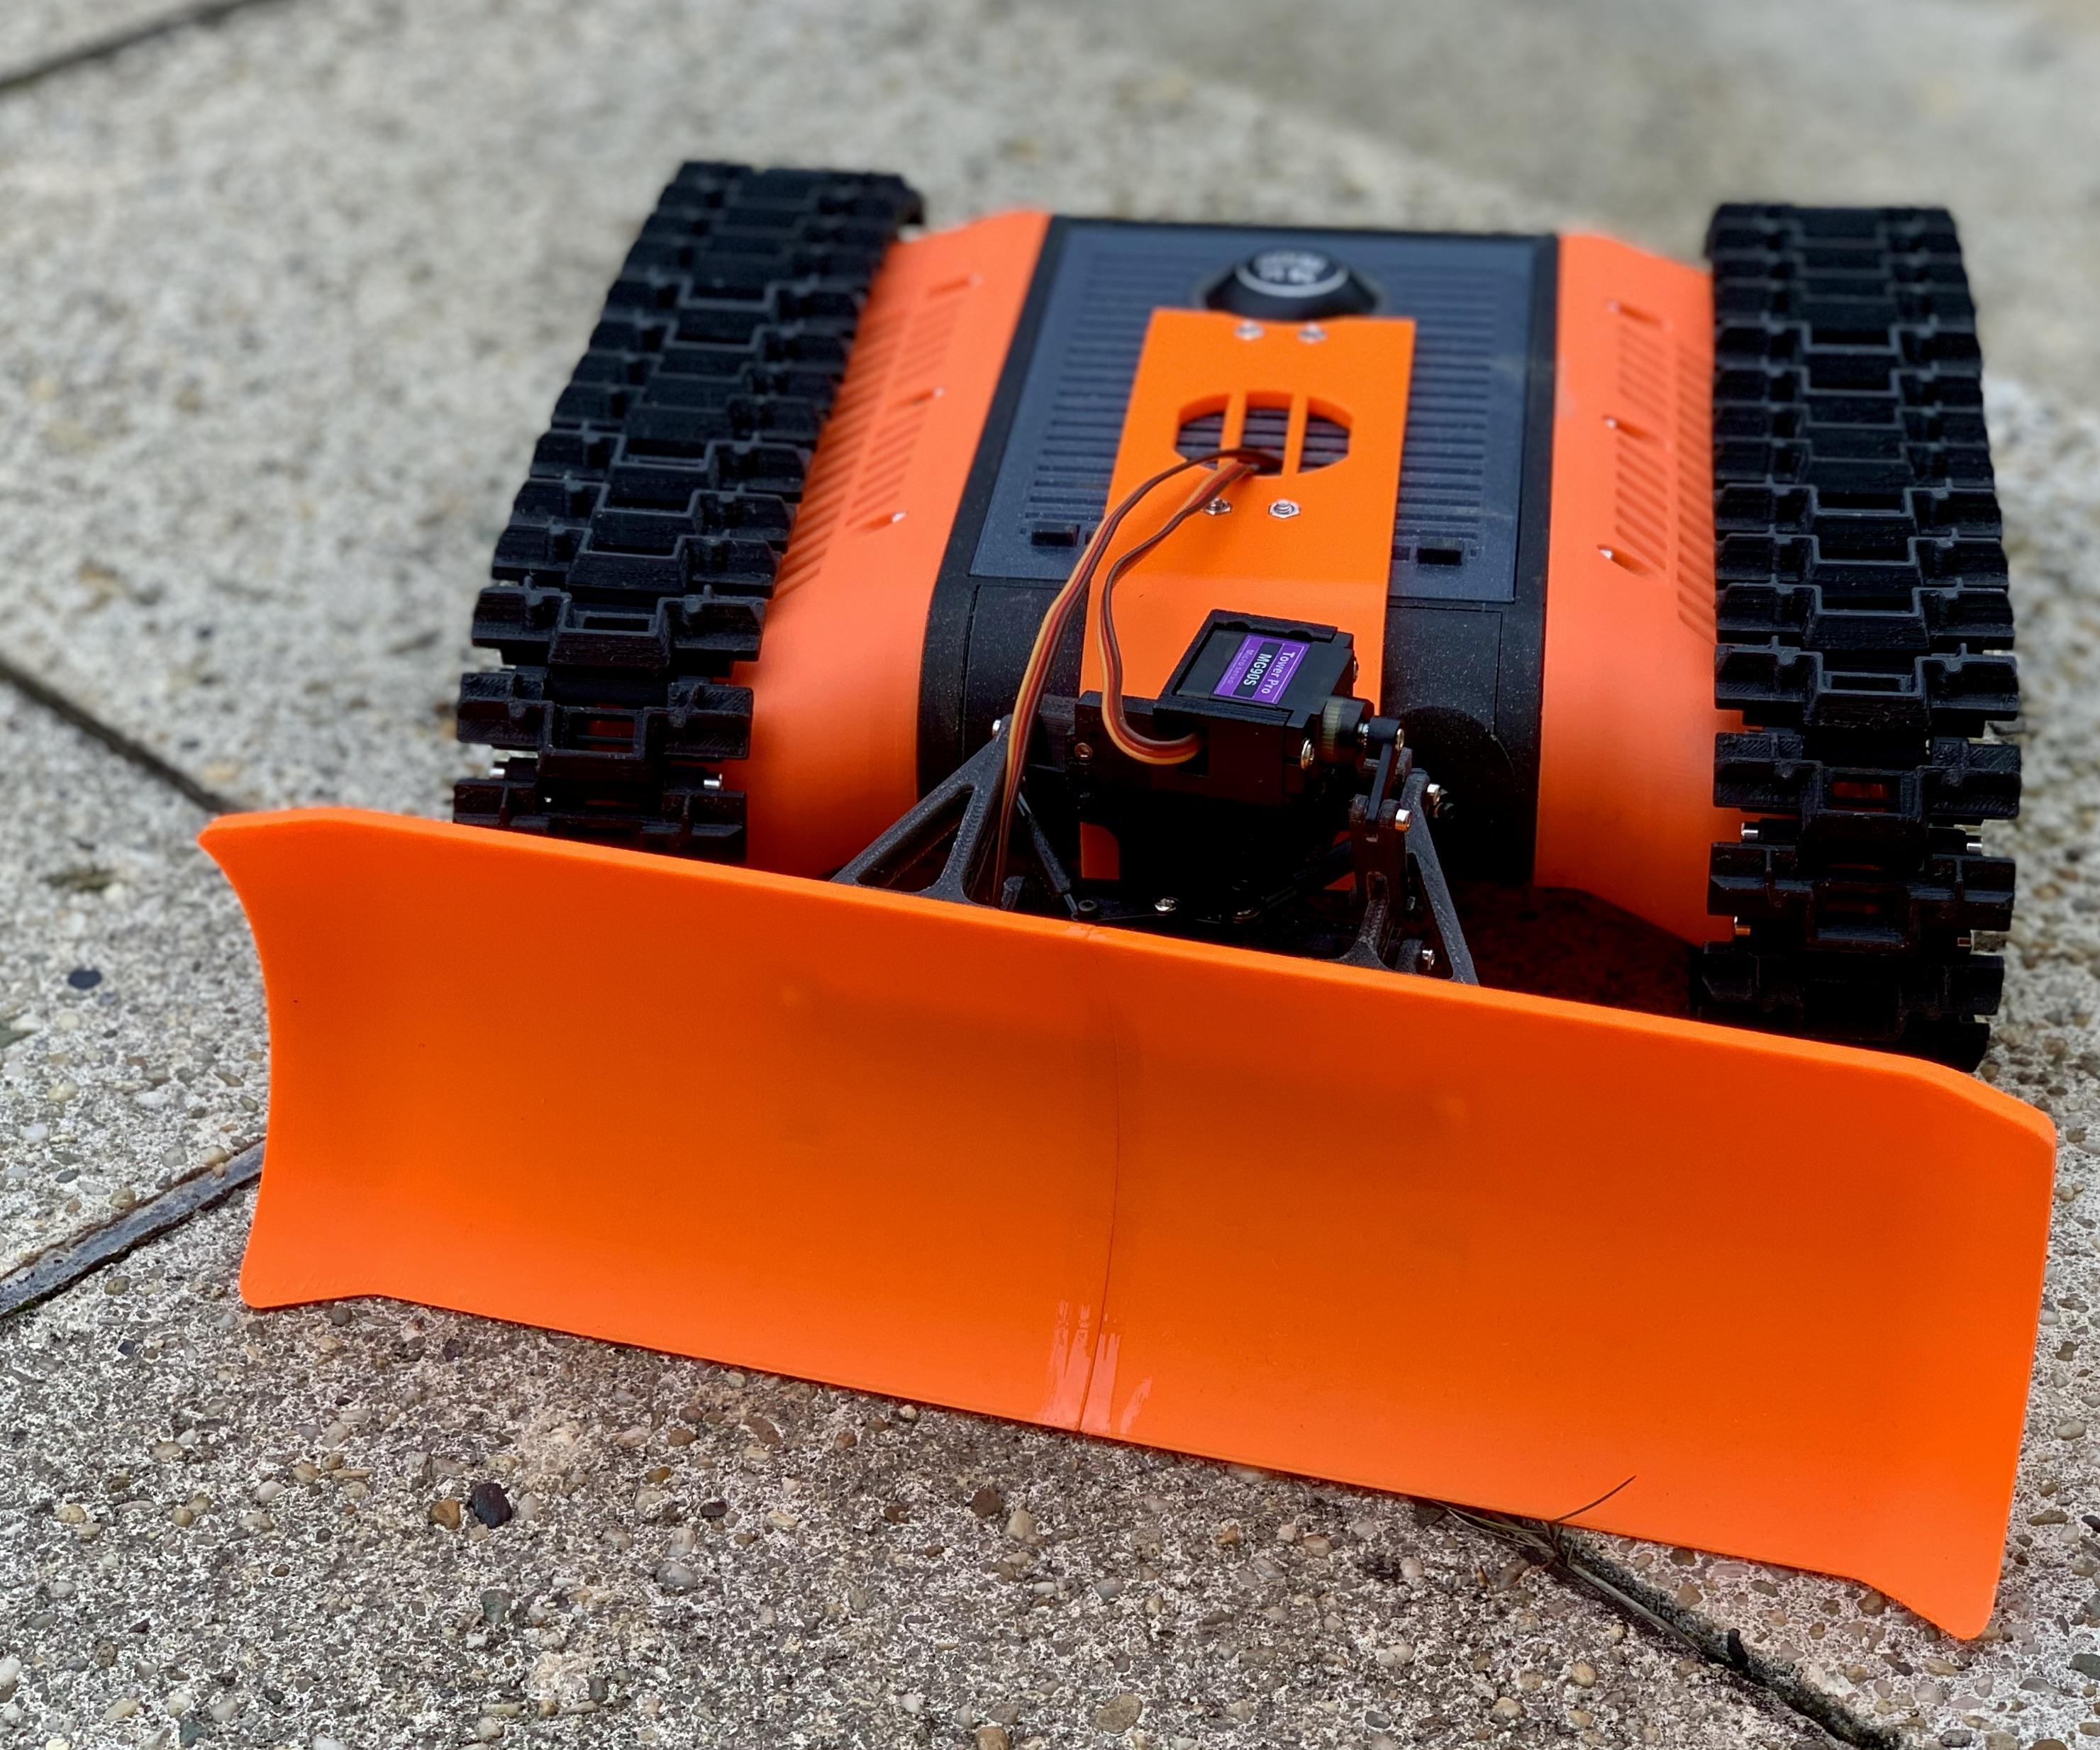 Snow Plow for the FPV Rover